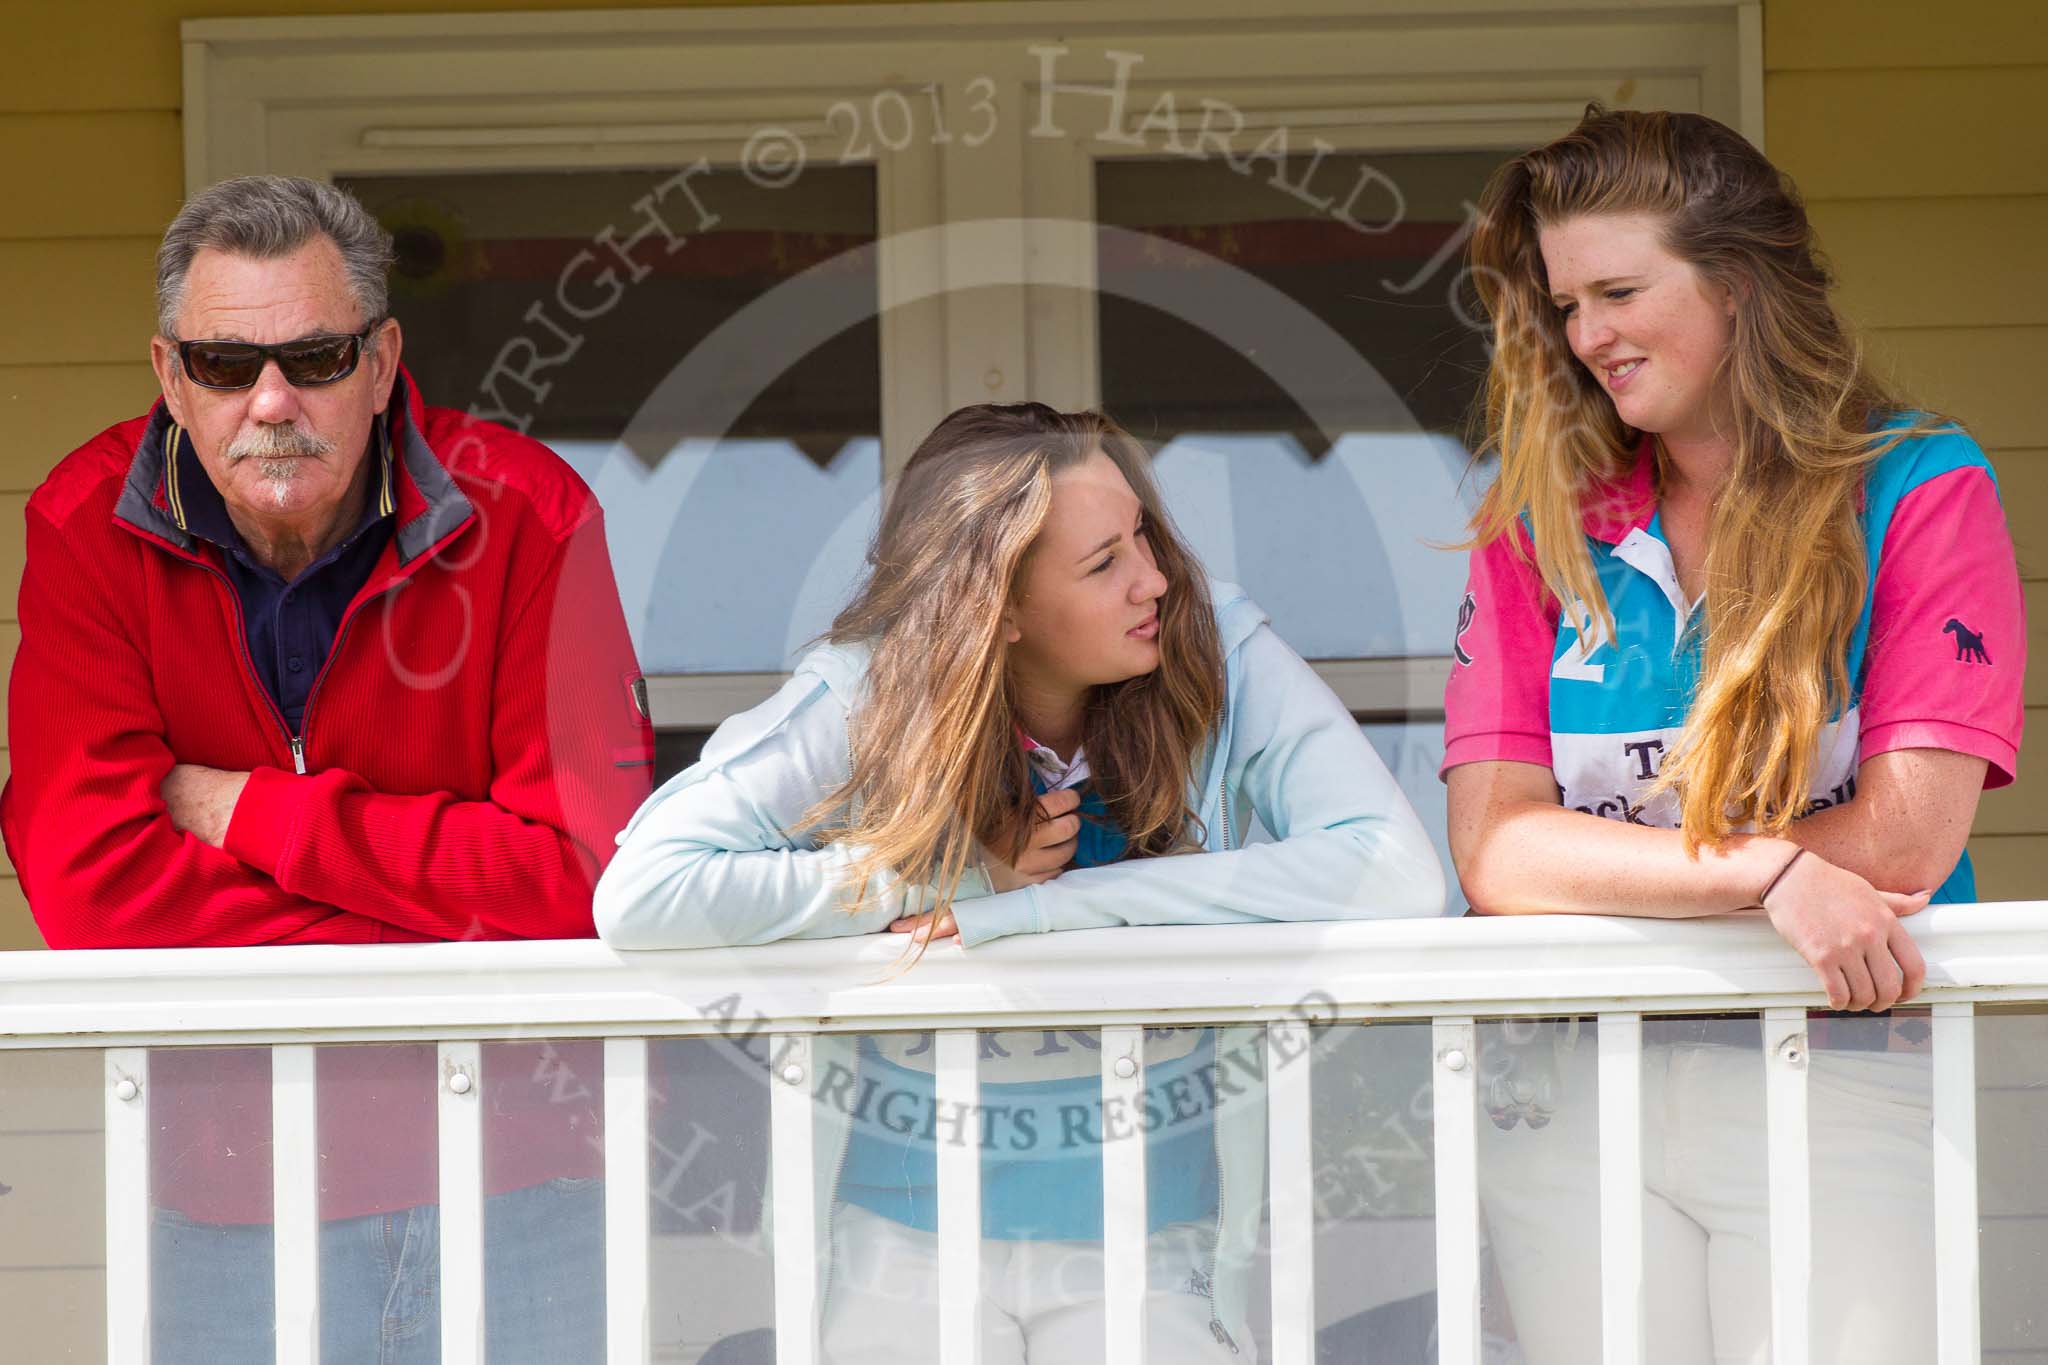 DBPC Polo in the Park 2013.
Dallas Burston Polo Club, ,
Southam,
Warwickshire,
United Kingdom,
on 01 September 2013 at 12:41, image #210